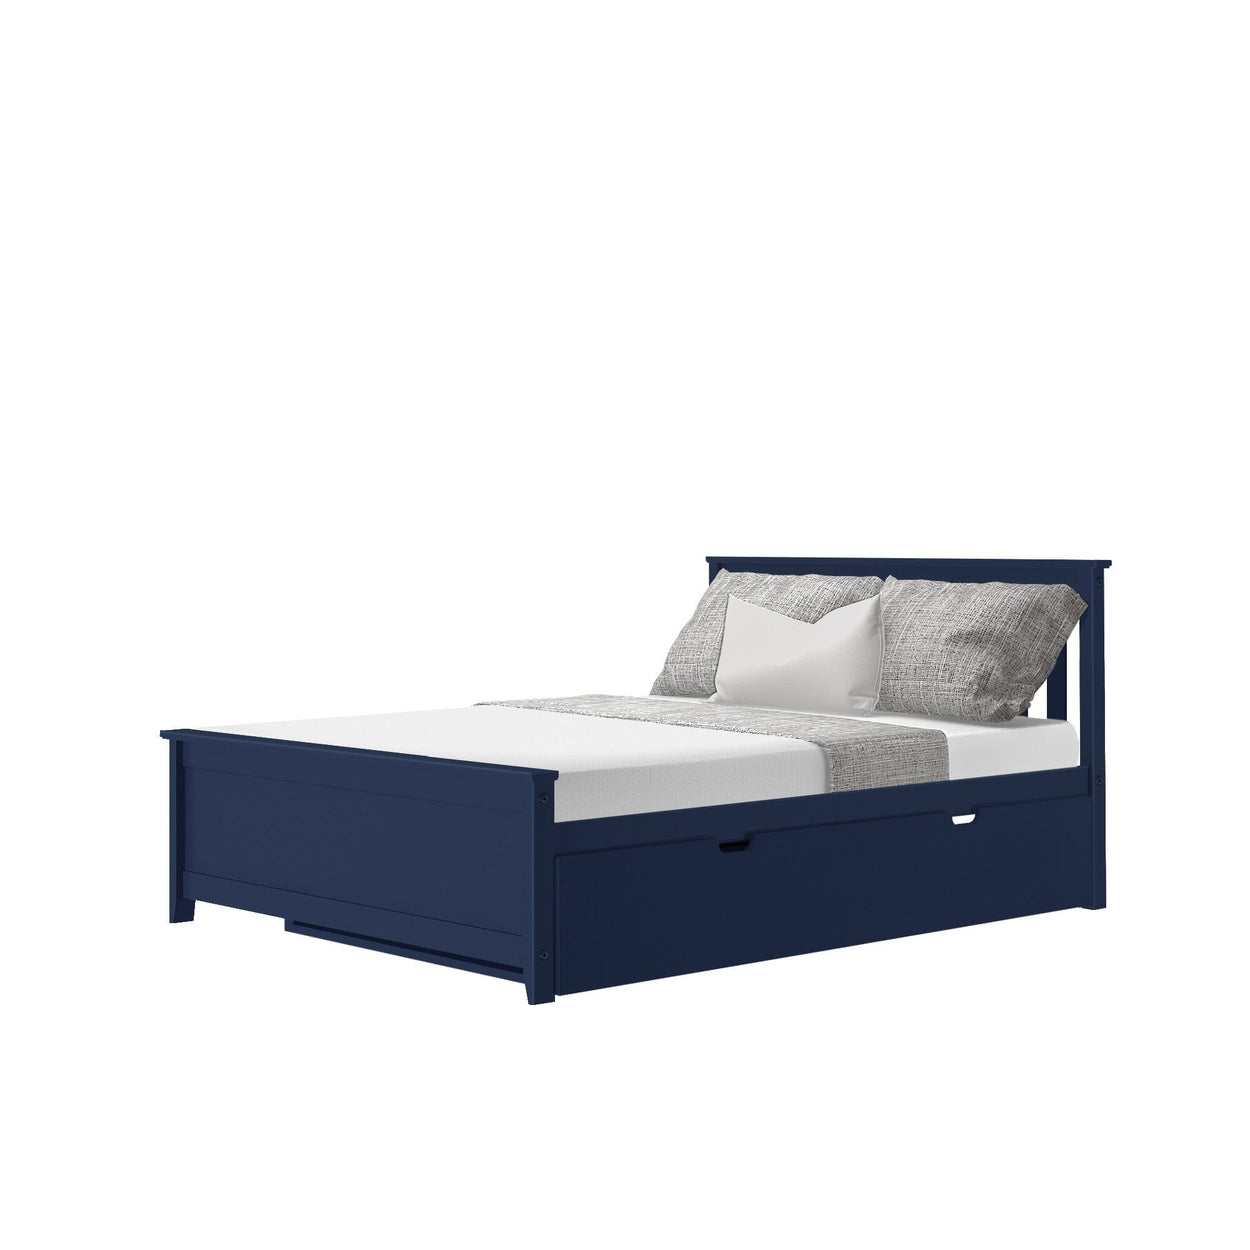 186211-131 : Kids Beds Classic Full-Size Bed with Trundle, Blue